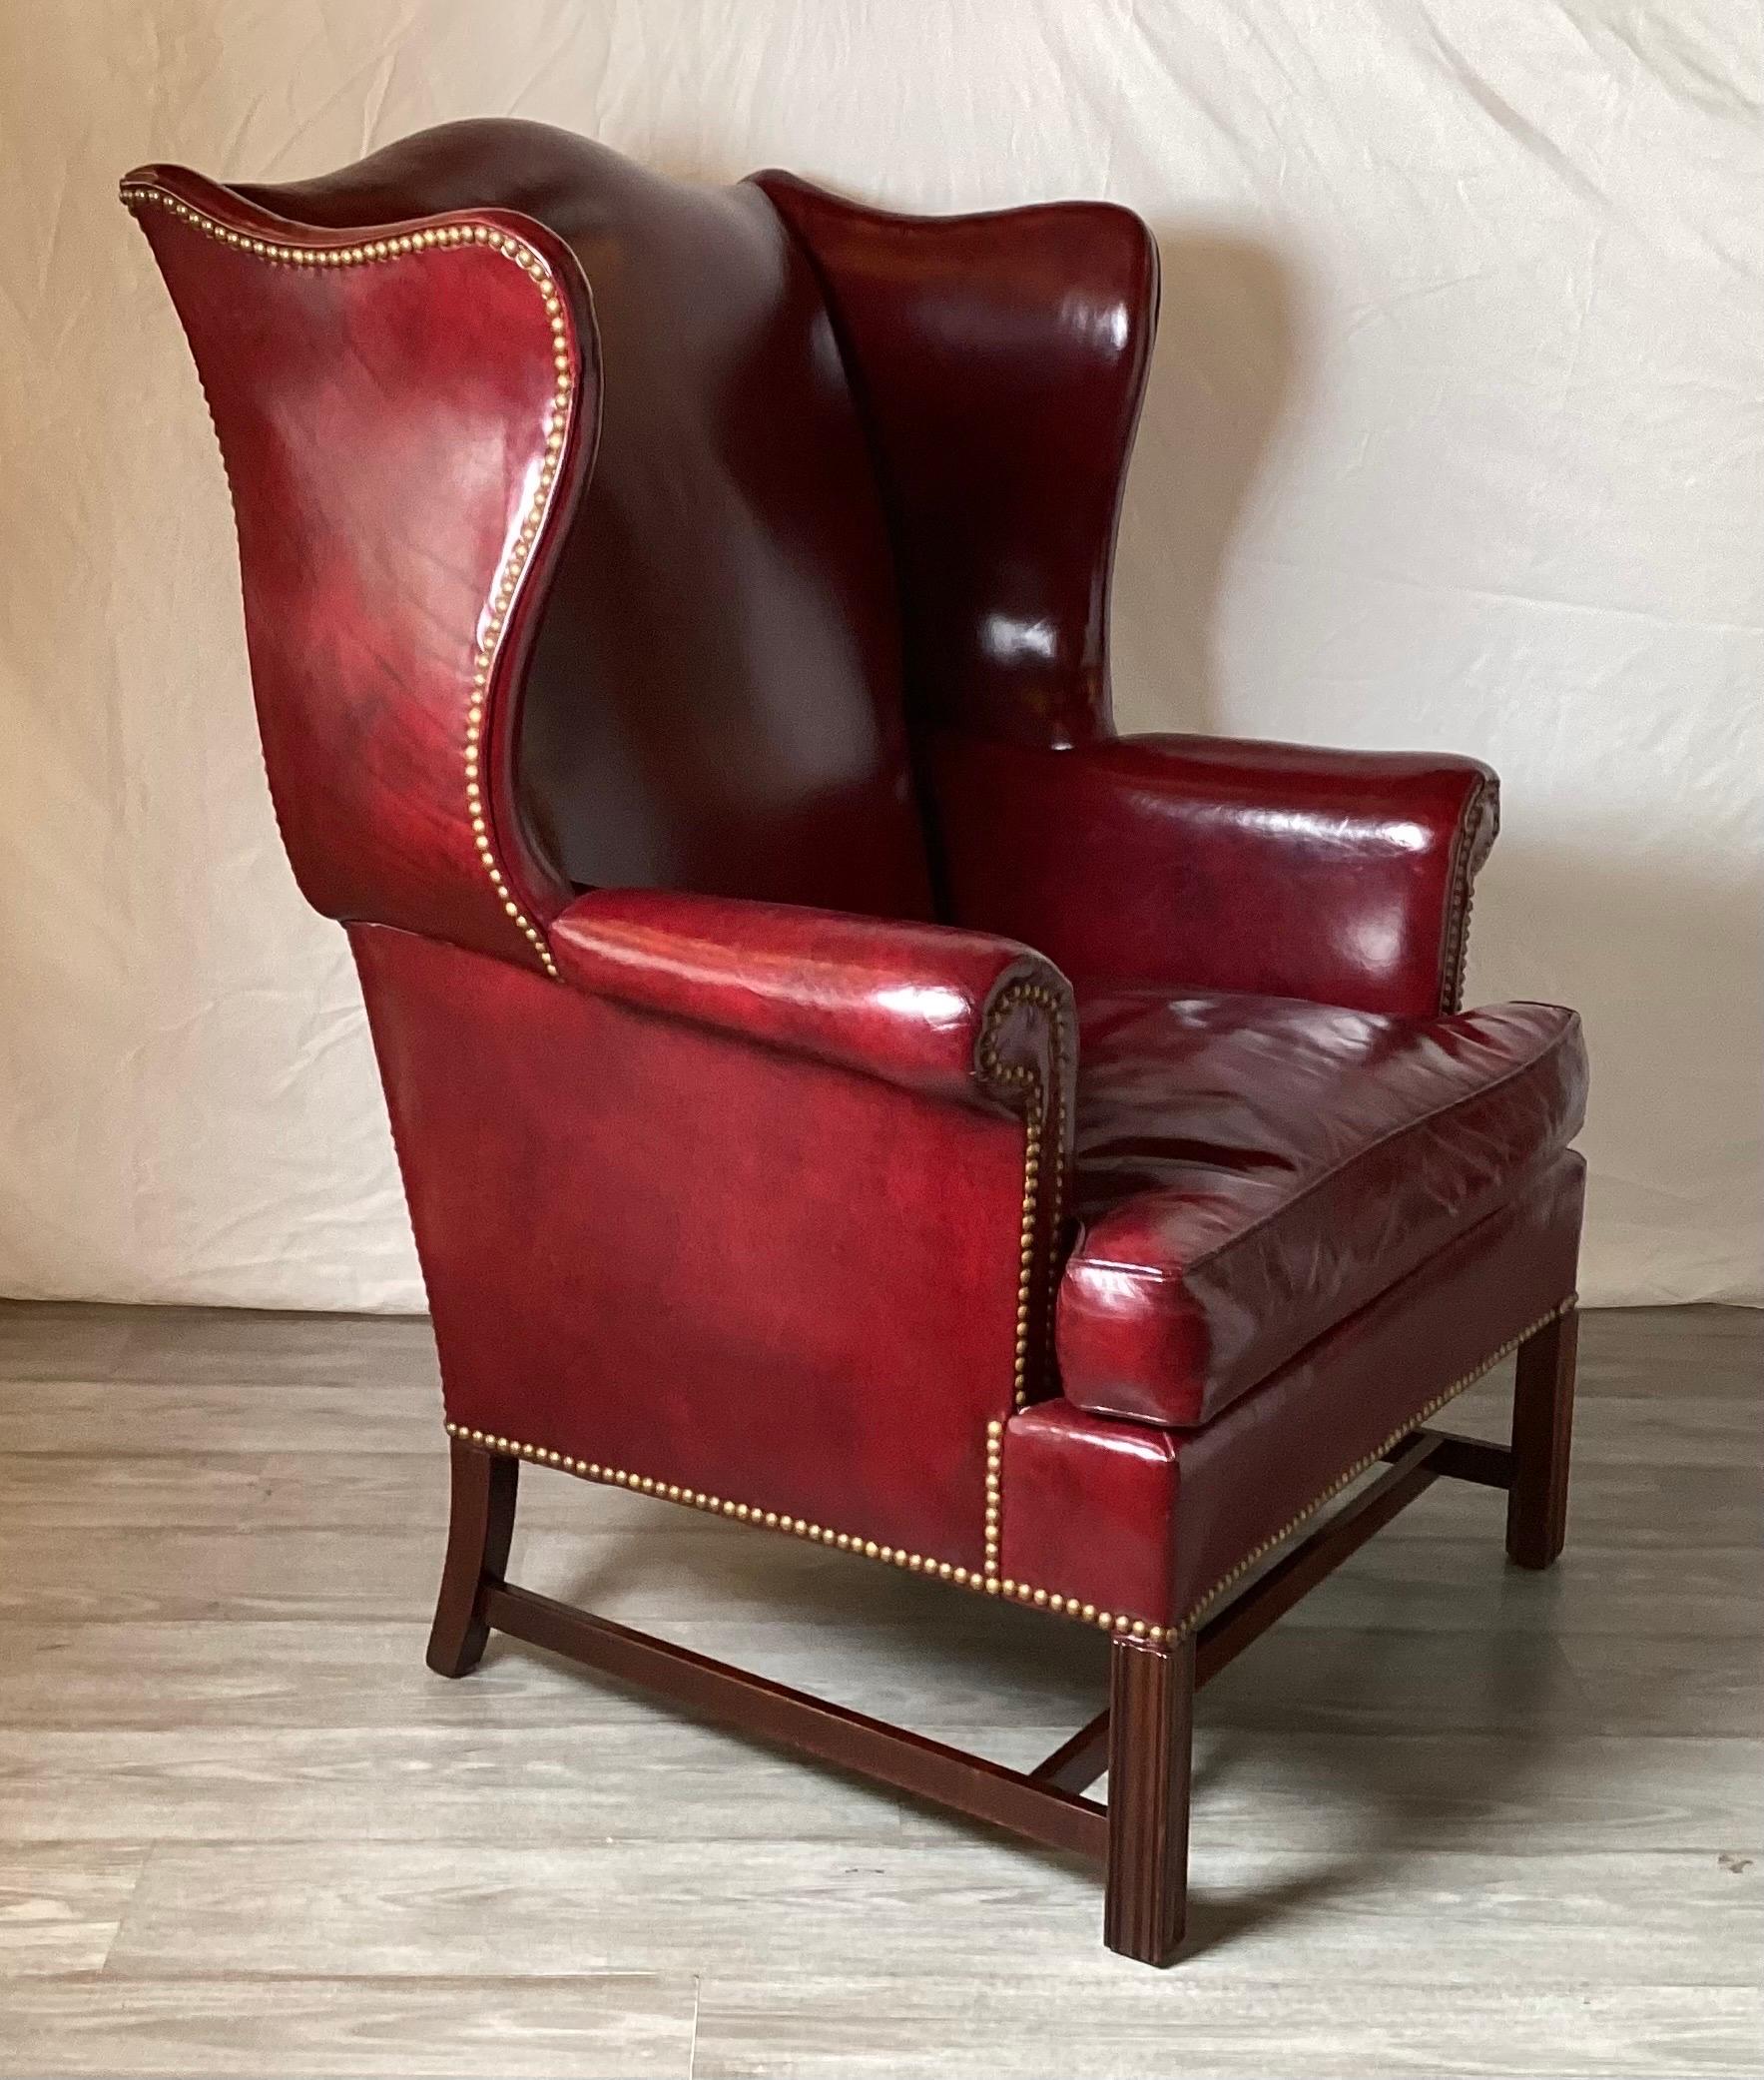 Pair of Cordovan Leather Devon Wing Chairs by Hickory Chair 1